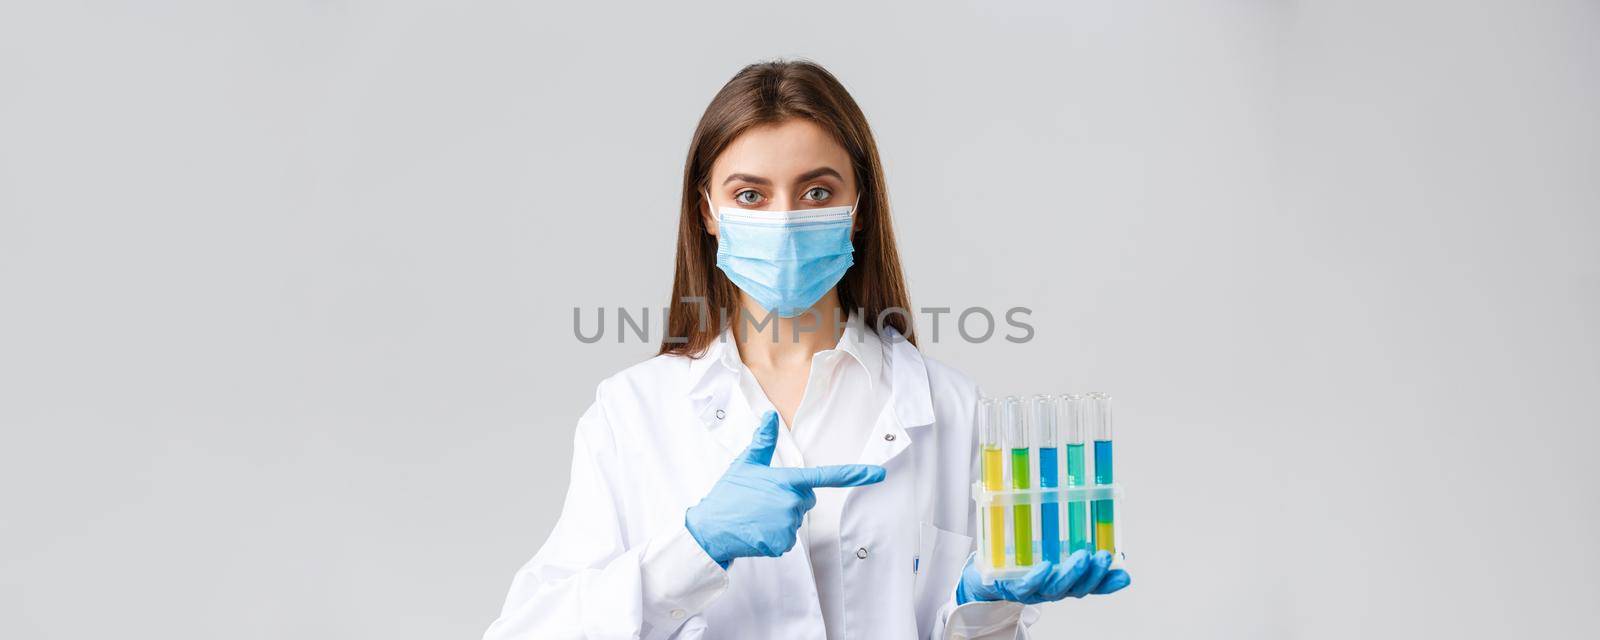 Covid-19, preventing virus, healthcare workers concept. Professional doctor in personal protective equipment, medical mask, pointing at test-tube with coronavirus vaccine, patient samples.